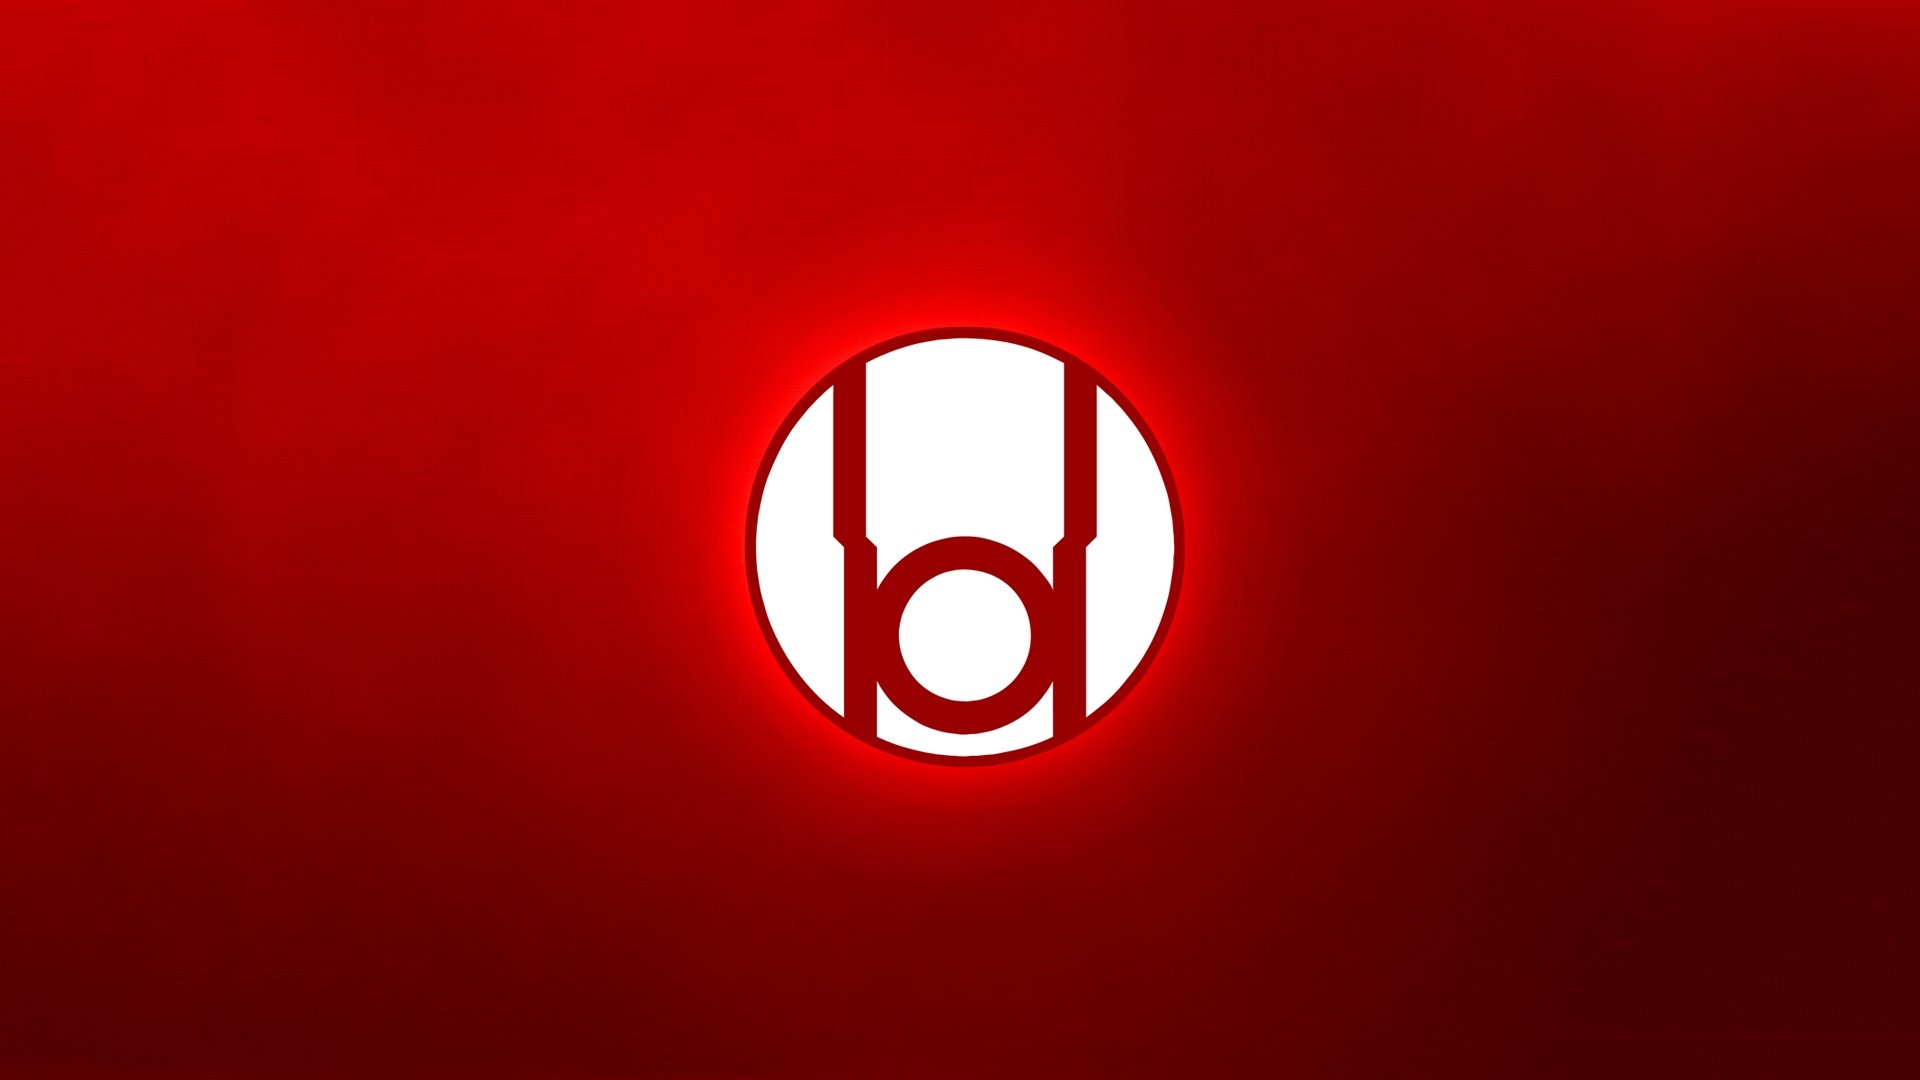 High resolution Red Lantern Corps full hd 1920x1080 background ID:25981 for computer